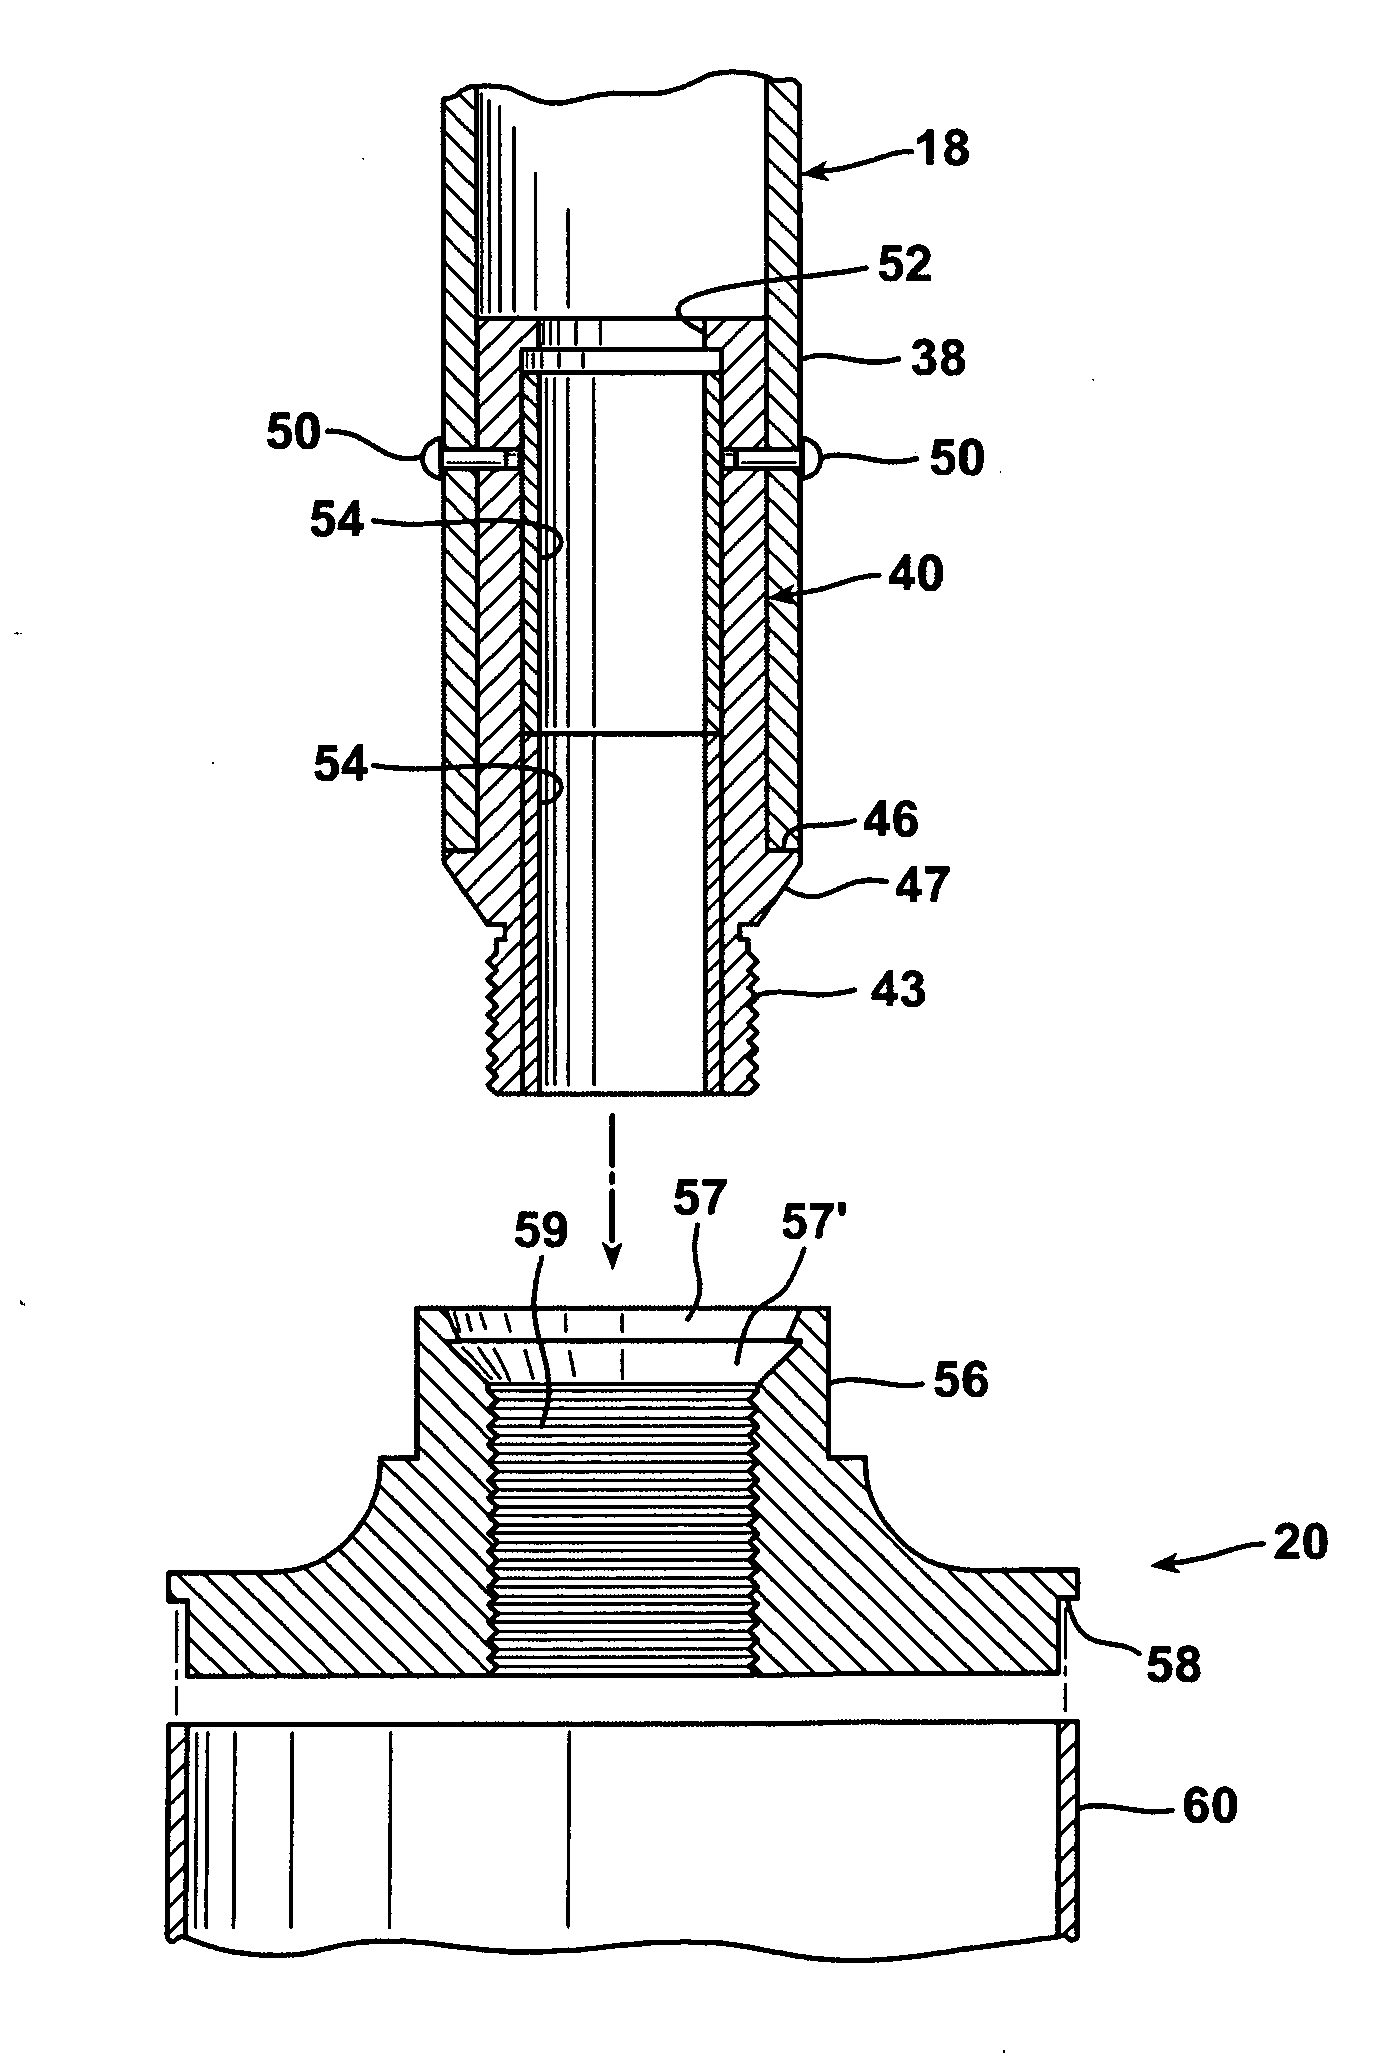 Hole coring system with lever arm